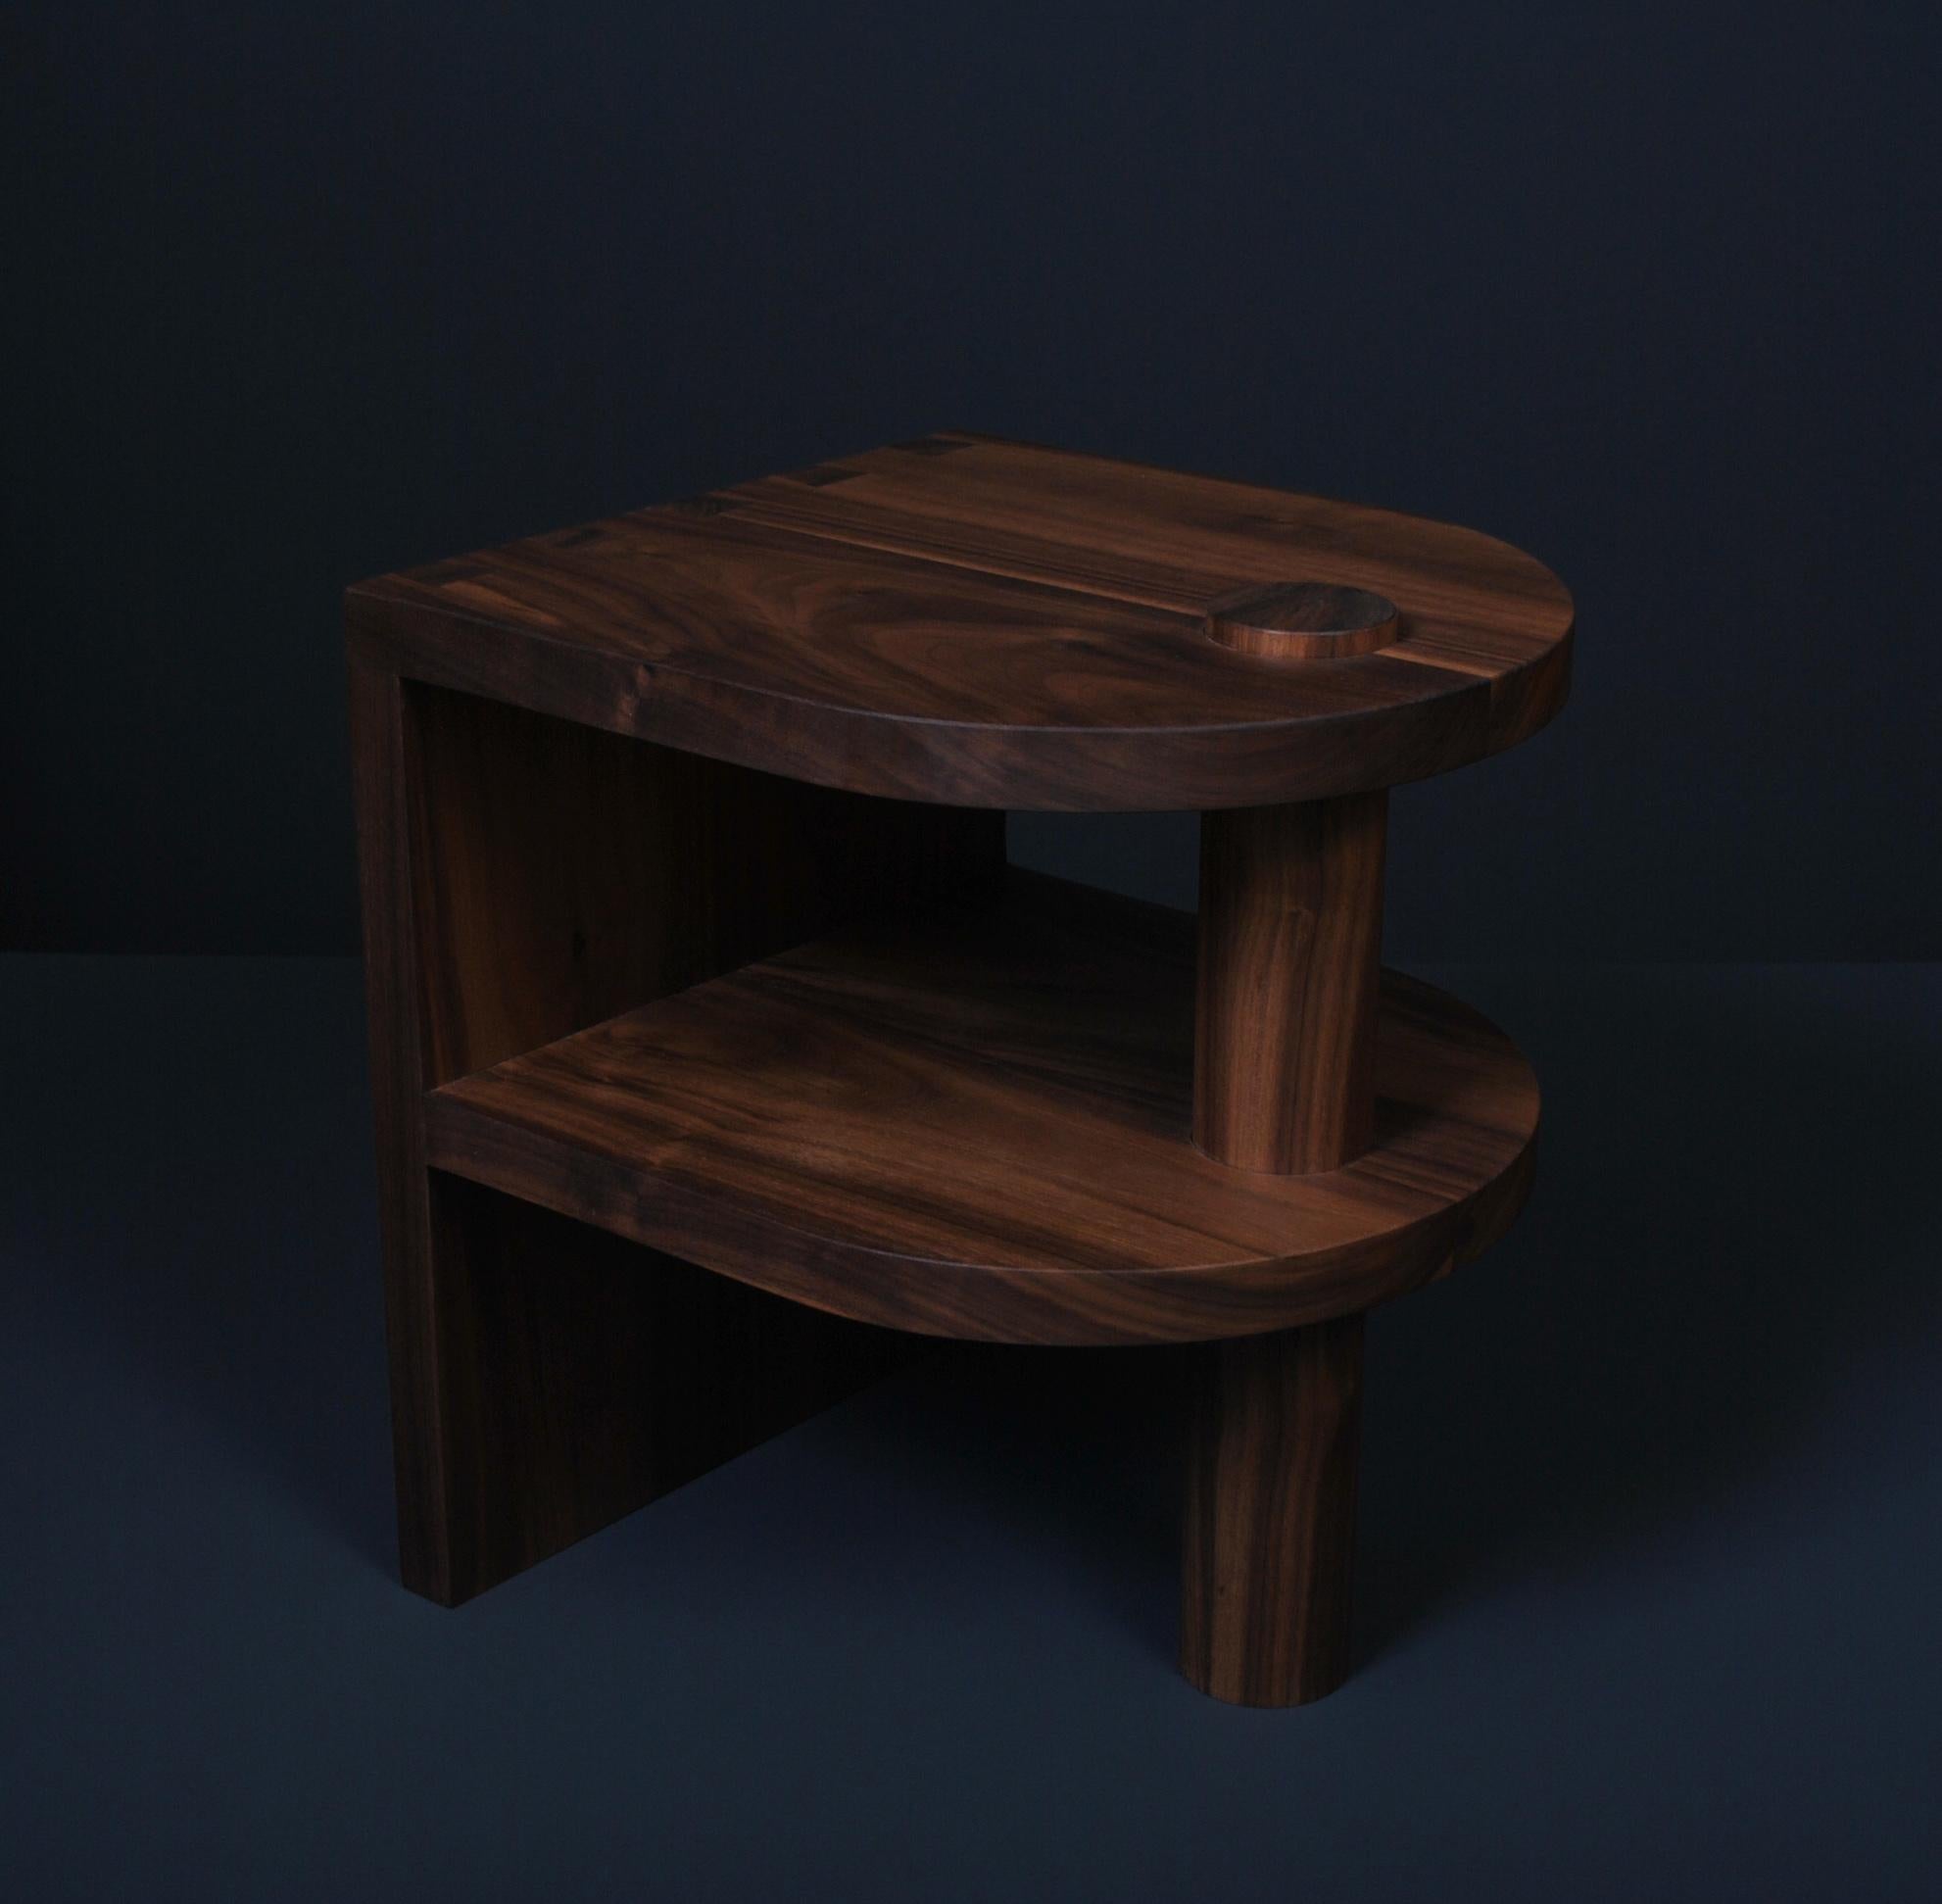 Contemporary Architectural Handcrafted Walnut End Table